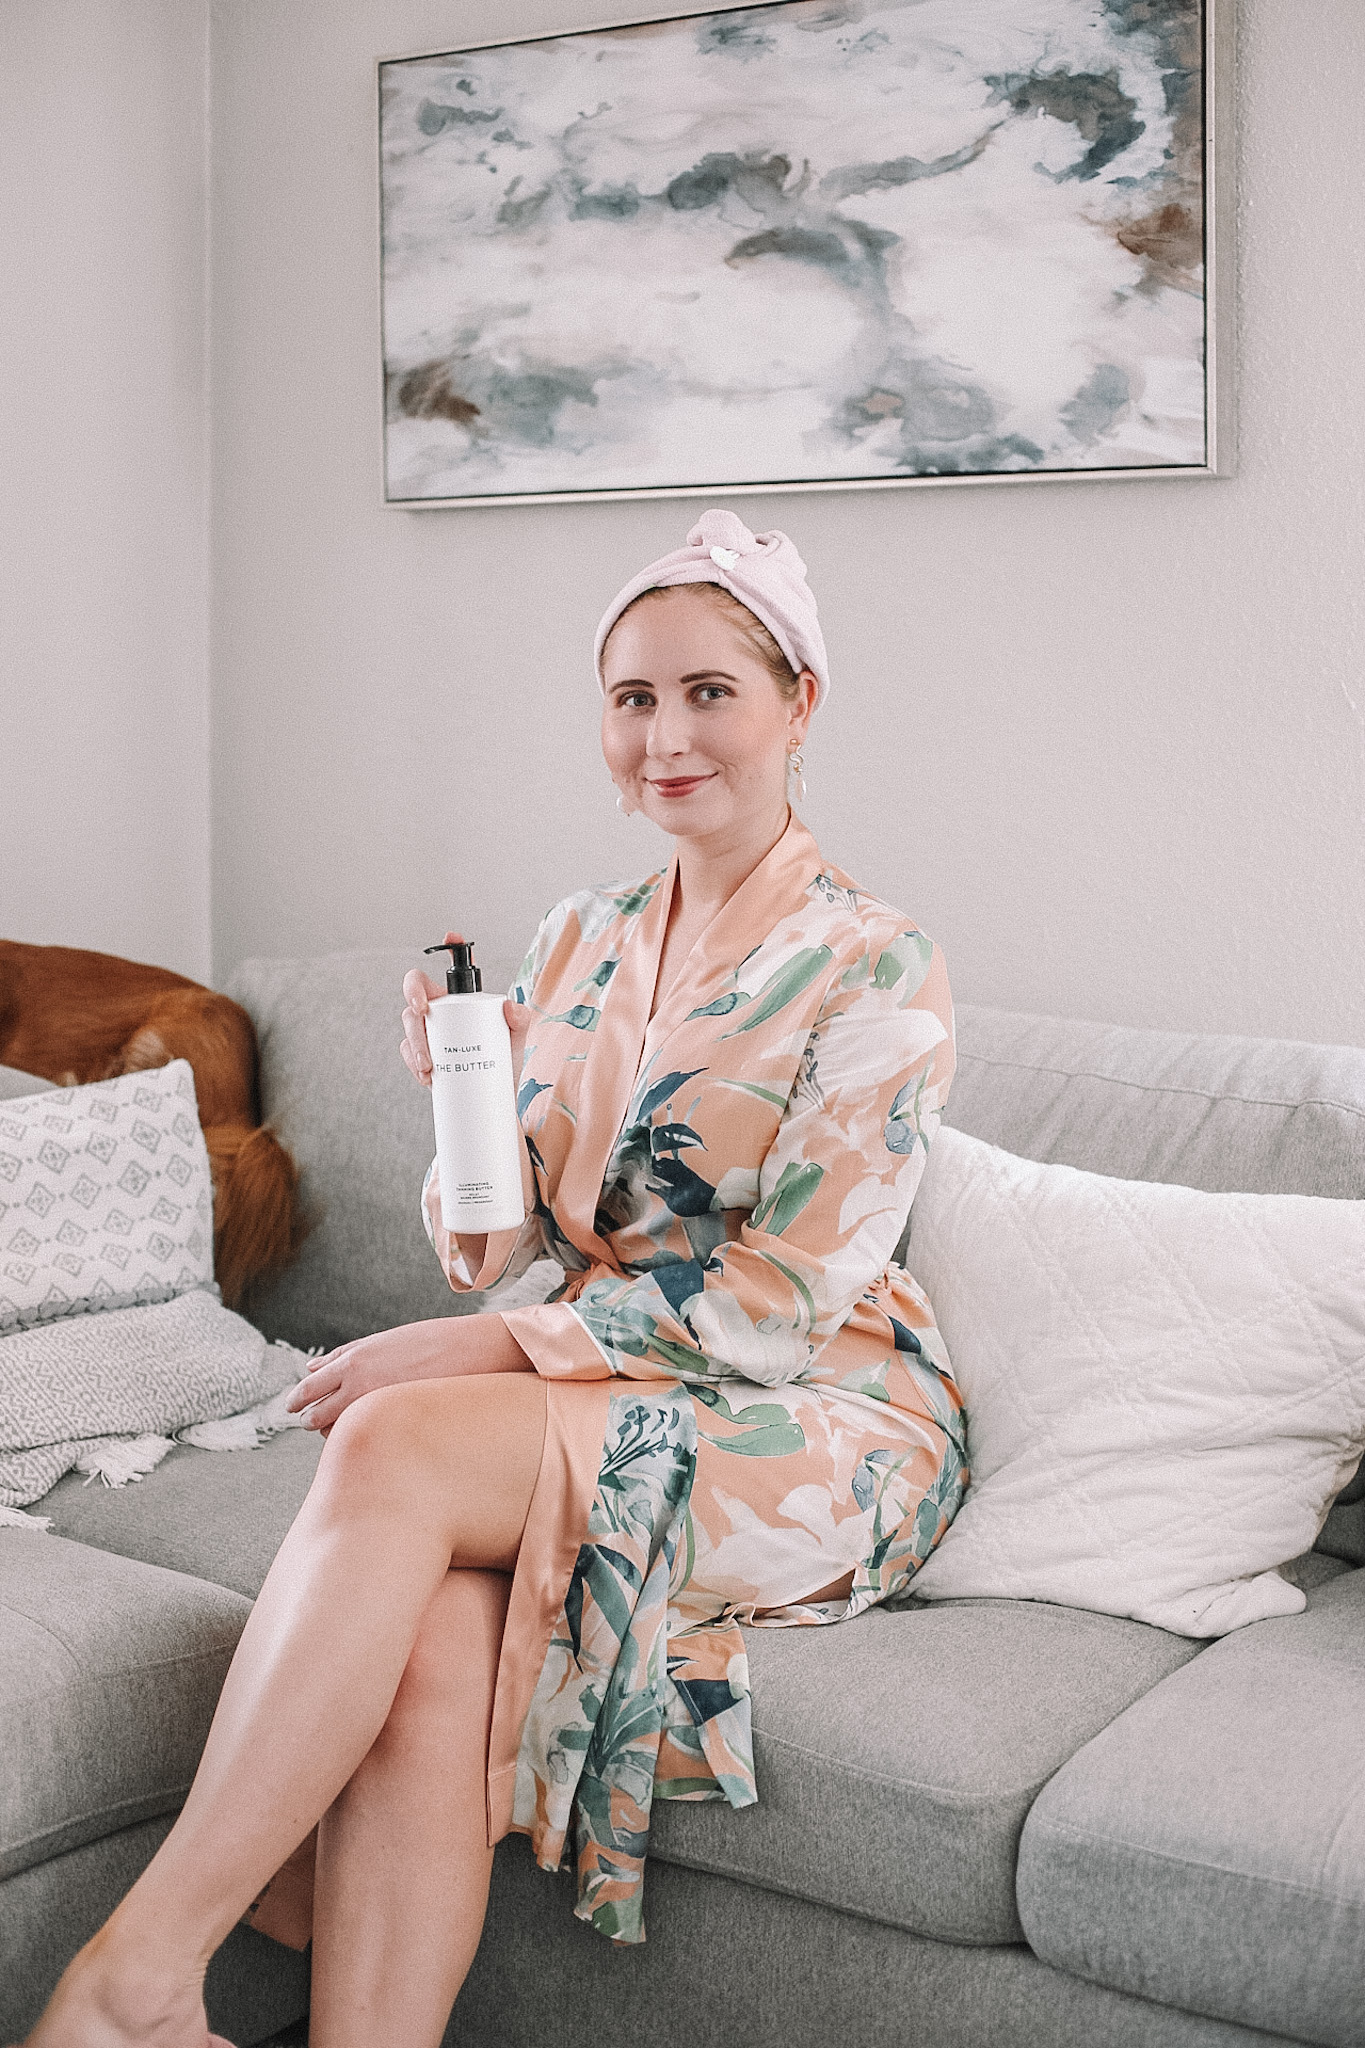 My Self Tanning Routine For Pale Skin | THE BUTTER Illuminating Tanning Butter | Tan-Luxe Product Review | THE BUTTER Illuminating Tanning Butter Review | Sephora Self Tanners For Pale Skin | Affordable by Amanda shares her self-tanning routine for pale skin wearing a floral robe sitting on a gray couch.